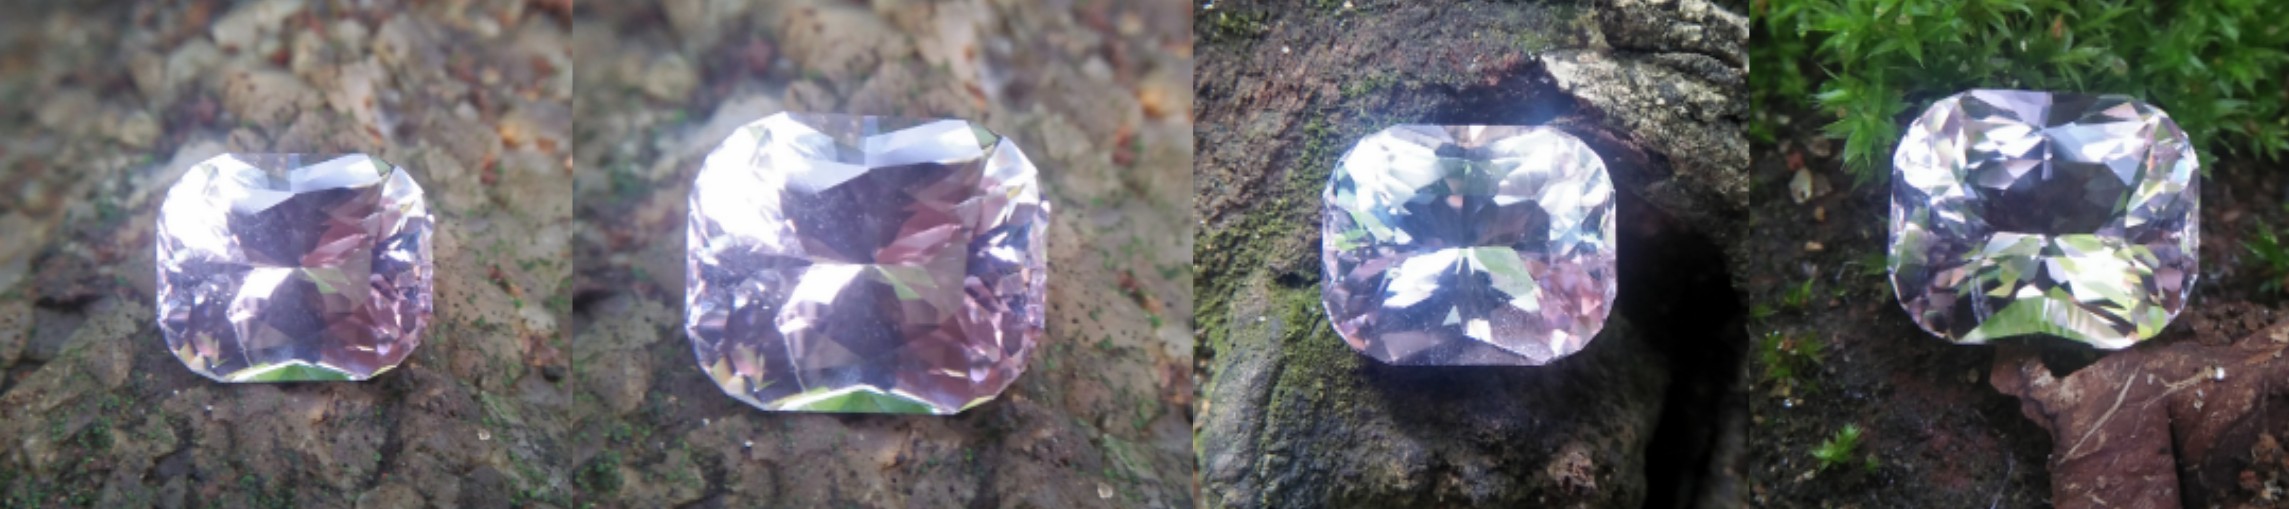 Morganite is the peachy-pink variety of beryl with chemical formula Be3Al2(Si6O18). Named after American banker John. Pierpoint Morgan in 1911. It can be found colors such as pink, rose, peach, and salmon and pinkish Purple. Morganite's colors are a result of the presence of manganese. It is also known as"Rose Beryl". Good quality morganite is relatively rare. It can be seen Fluorescence Under UV light Inert to weak pink to violetish red. Morganite is a type I clarity stone. As Inclusions, Liquid and two-phase inclusions, hollow or liquid-filled parallel tubes and fingerprints are sometimes seen. Morganite can be found in Colombia, Afghanistan, Western Australia, Austria, Brazil, Bulgaria, Canada, China, Ethiopia, India, Italy, Madagascar, Mozambique, Namibia, Nigeria, Kazakhstan, Russia, Tanzania, Zambia, USA, Sri Lanka, Myanmar. Healing Properties of Morganite As a beryl family Gemstone, Morganite is a powerful and high vibrational stone. It can release stress when we connect with its vibrant energy. It helps to attract and maintain love. Morganite stimulates the Heart chakra and cleans the aura. It helps to open and heals the Heart Chakra. Morganite is highly beneficial for cultivating human spiritual power. Pink Morganite Color Energy brings the energy rays of determination, commitment, and caring. It's also a very beneficial gemstone for meditation with it's higher vibrant power. Beryl is a mineral composed of beryllium aluminum cyclosilicate with the chemical formula Be₃Al₂Si₆O₁₈. Beryl is hexagonal mineral with 7.5 – 8 hardness according to the more hardness scale. Beryl hexagonal Crystals can be up to several meters in the size. But, Double terminated crystals are very rare to see. Beryl can be found as translucent or transparent with 2.63 - 2.92 specific gravity. It is Uniaxial (-) mineral with nω = 1.568 - 1.602 nε = 1.564 - 1.595 refractive indexes. Some Morganite has weak violet fluorescence under UV light. Beryl has Vitreous, Sub-Vitreous, Waxy or Greasy luster. Beryl varieties can be found in Sri Lanka, USA, Pakistan, Tanzania, Russia, Afghanistan, Mozambique, Madagascar, Nigeria, Australia, Argentina, Brazil, Bhutan, Canada, China, Colombia, Denmark, Finland, Germany, India, Morocco, Namibia, New Zealand, Norway, Uganda, Uk. Healing properties of beryl Beryl can reduce stress. It will help you let go of your unnecessary or unwanted emotional baggage. Beryl is often used to help you find the answers in spiritual life. Beryl will promote creativity and raise your intelligence. Beryl can help the organs of elimination to function better. It can strengthen the circulatory systems. also, it increases the body’s resistance to pollutants and toxins. Beryl gives very positive favorable vibrations to give you the ability to have quick intellectual responses and mental clarity. Beryl will bring you good fortune and good luck. Beryl is a crystal of energy, healing and strengthening the body’s entire vibrational field. Beryl color varieties work with different chakras.